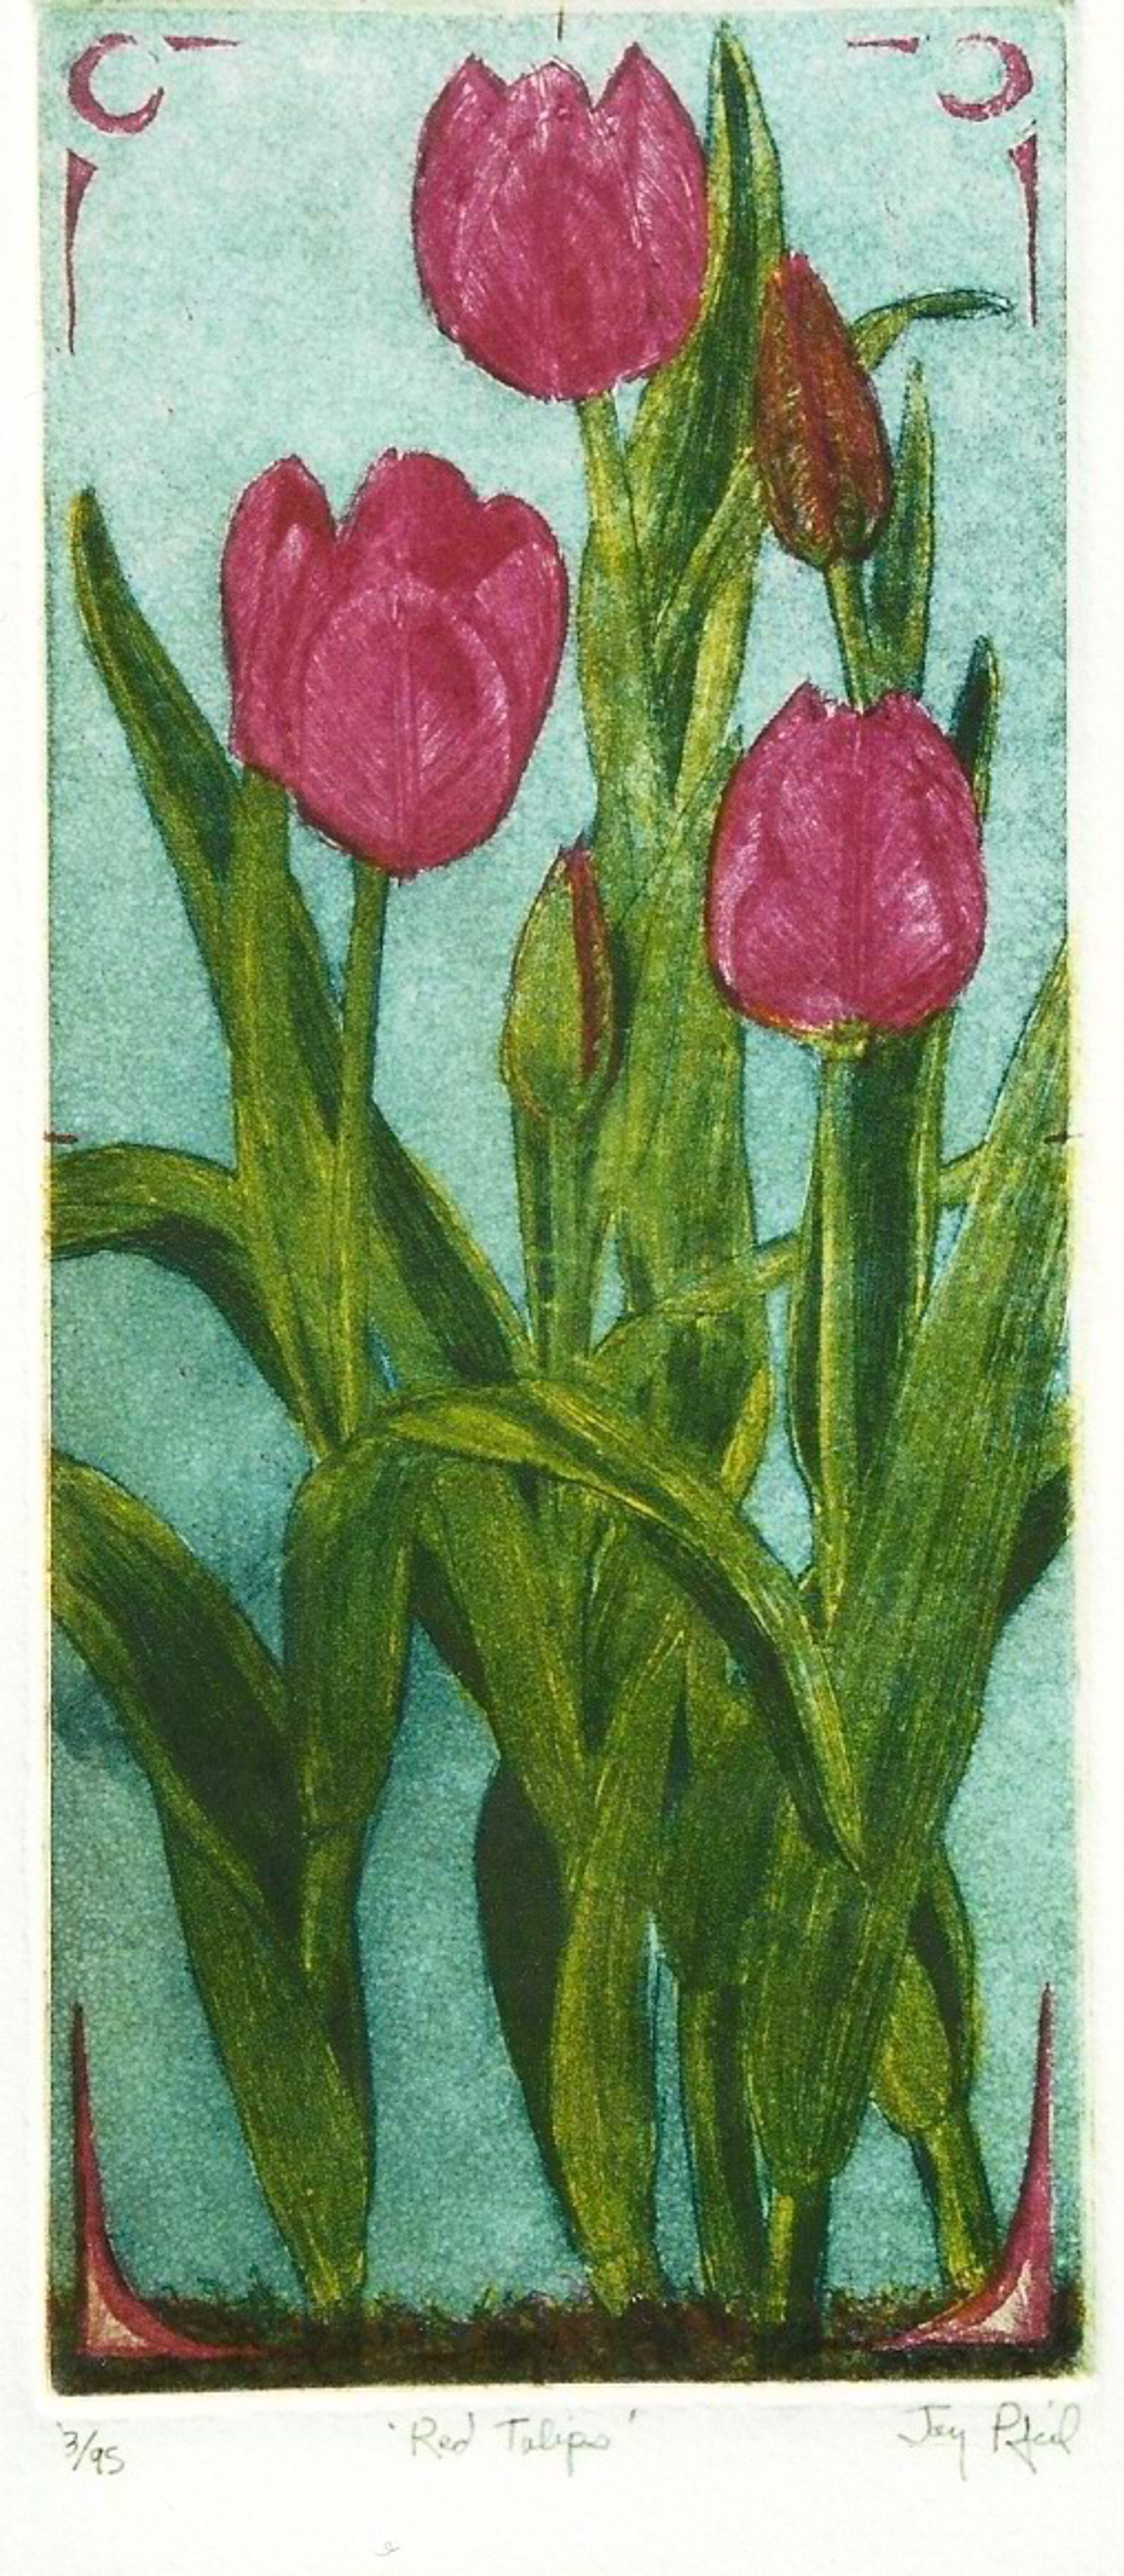 Red Tulips by Jay Pfeil